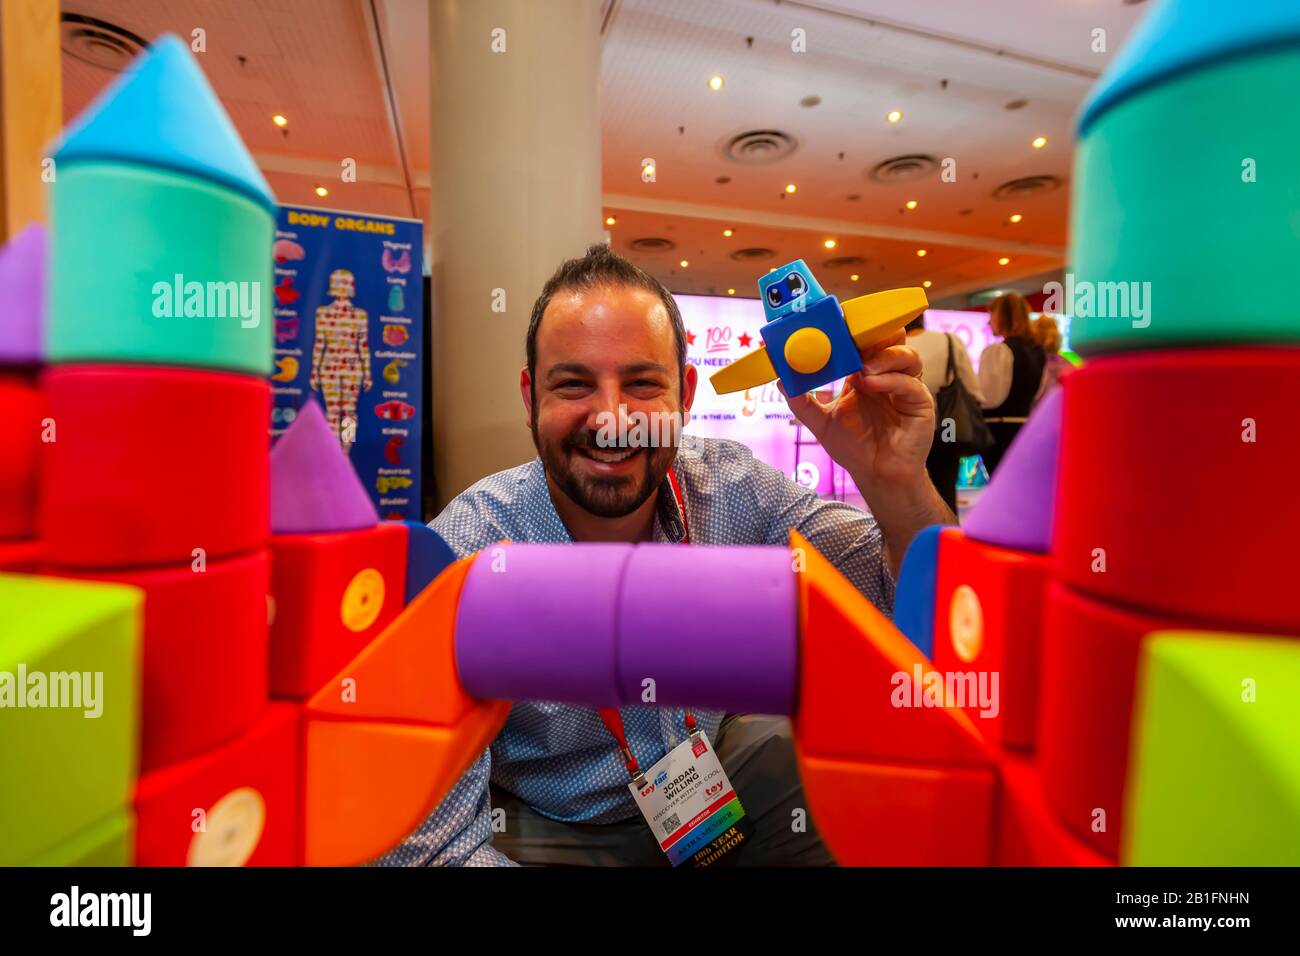 Jordan Willing, inventor of Blockaroos at the 117th North American International Toy Fair in the Jacob Javits Convention center in New York on Sunday, February 23, 2020.  The four day trade show with over 1000 exhibitors connects buyers and sellers and draws tens of thousands of attendees.  The toy industry generates over $26 billion in the U.S. alone and Toy Fair is the largest toy trade show in the Western Hemisphere. (© Richard B. Levine) Stock Photo